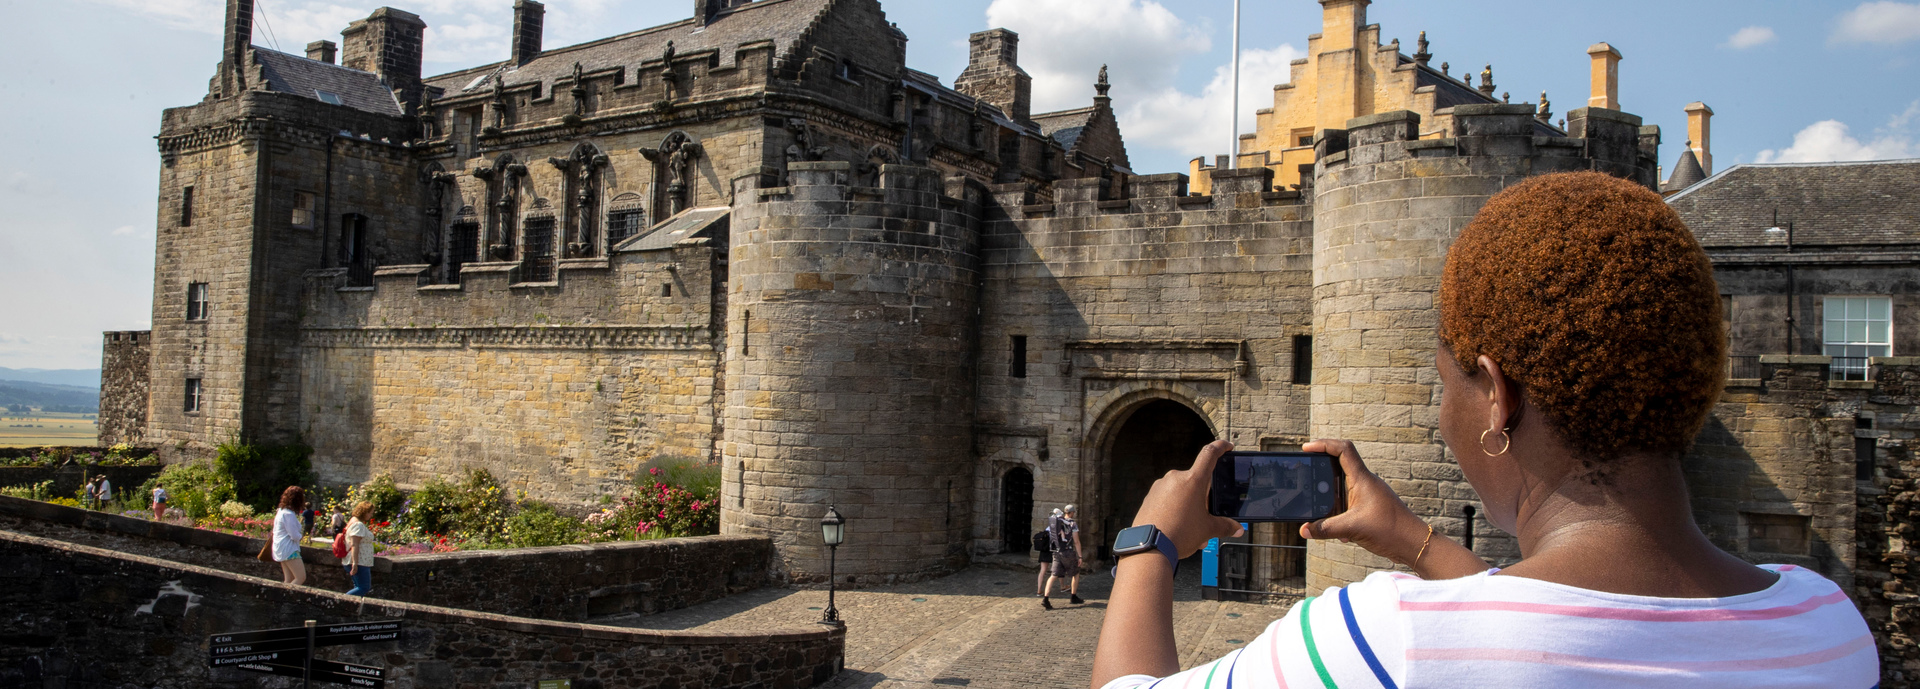 A student taking a photo of the entrance to Stirling Castle